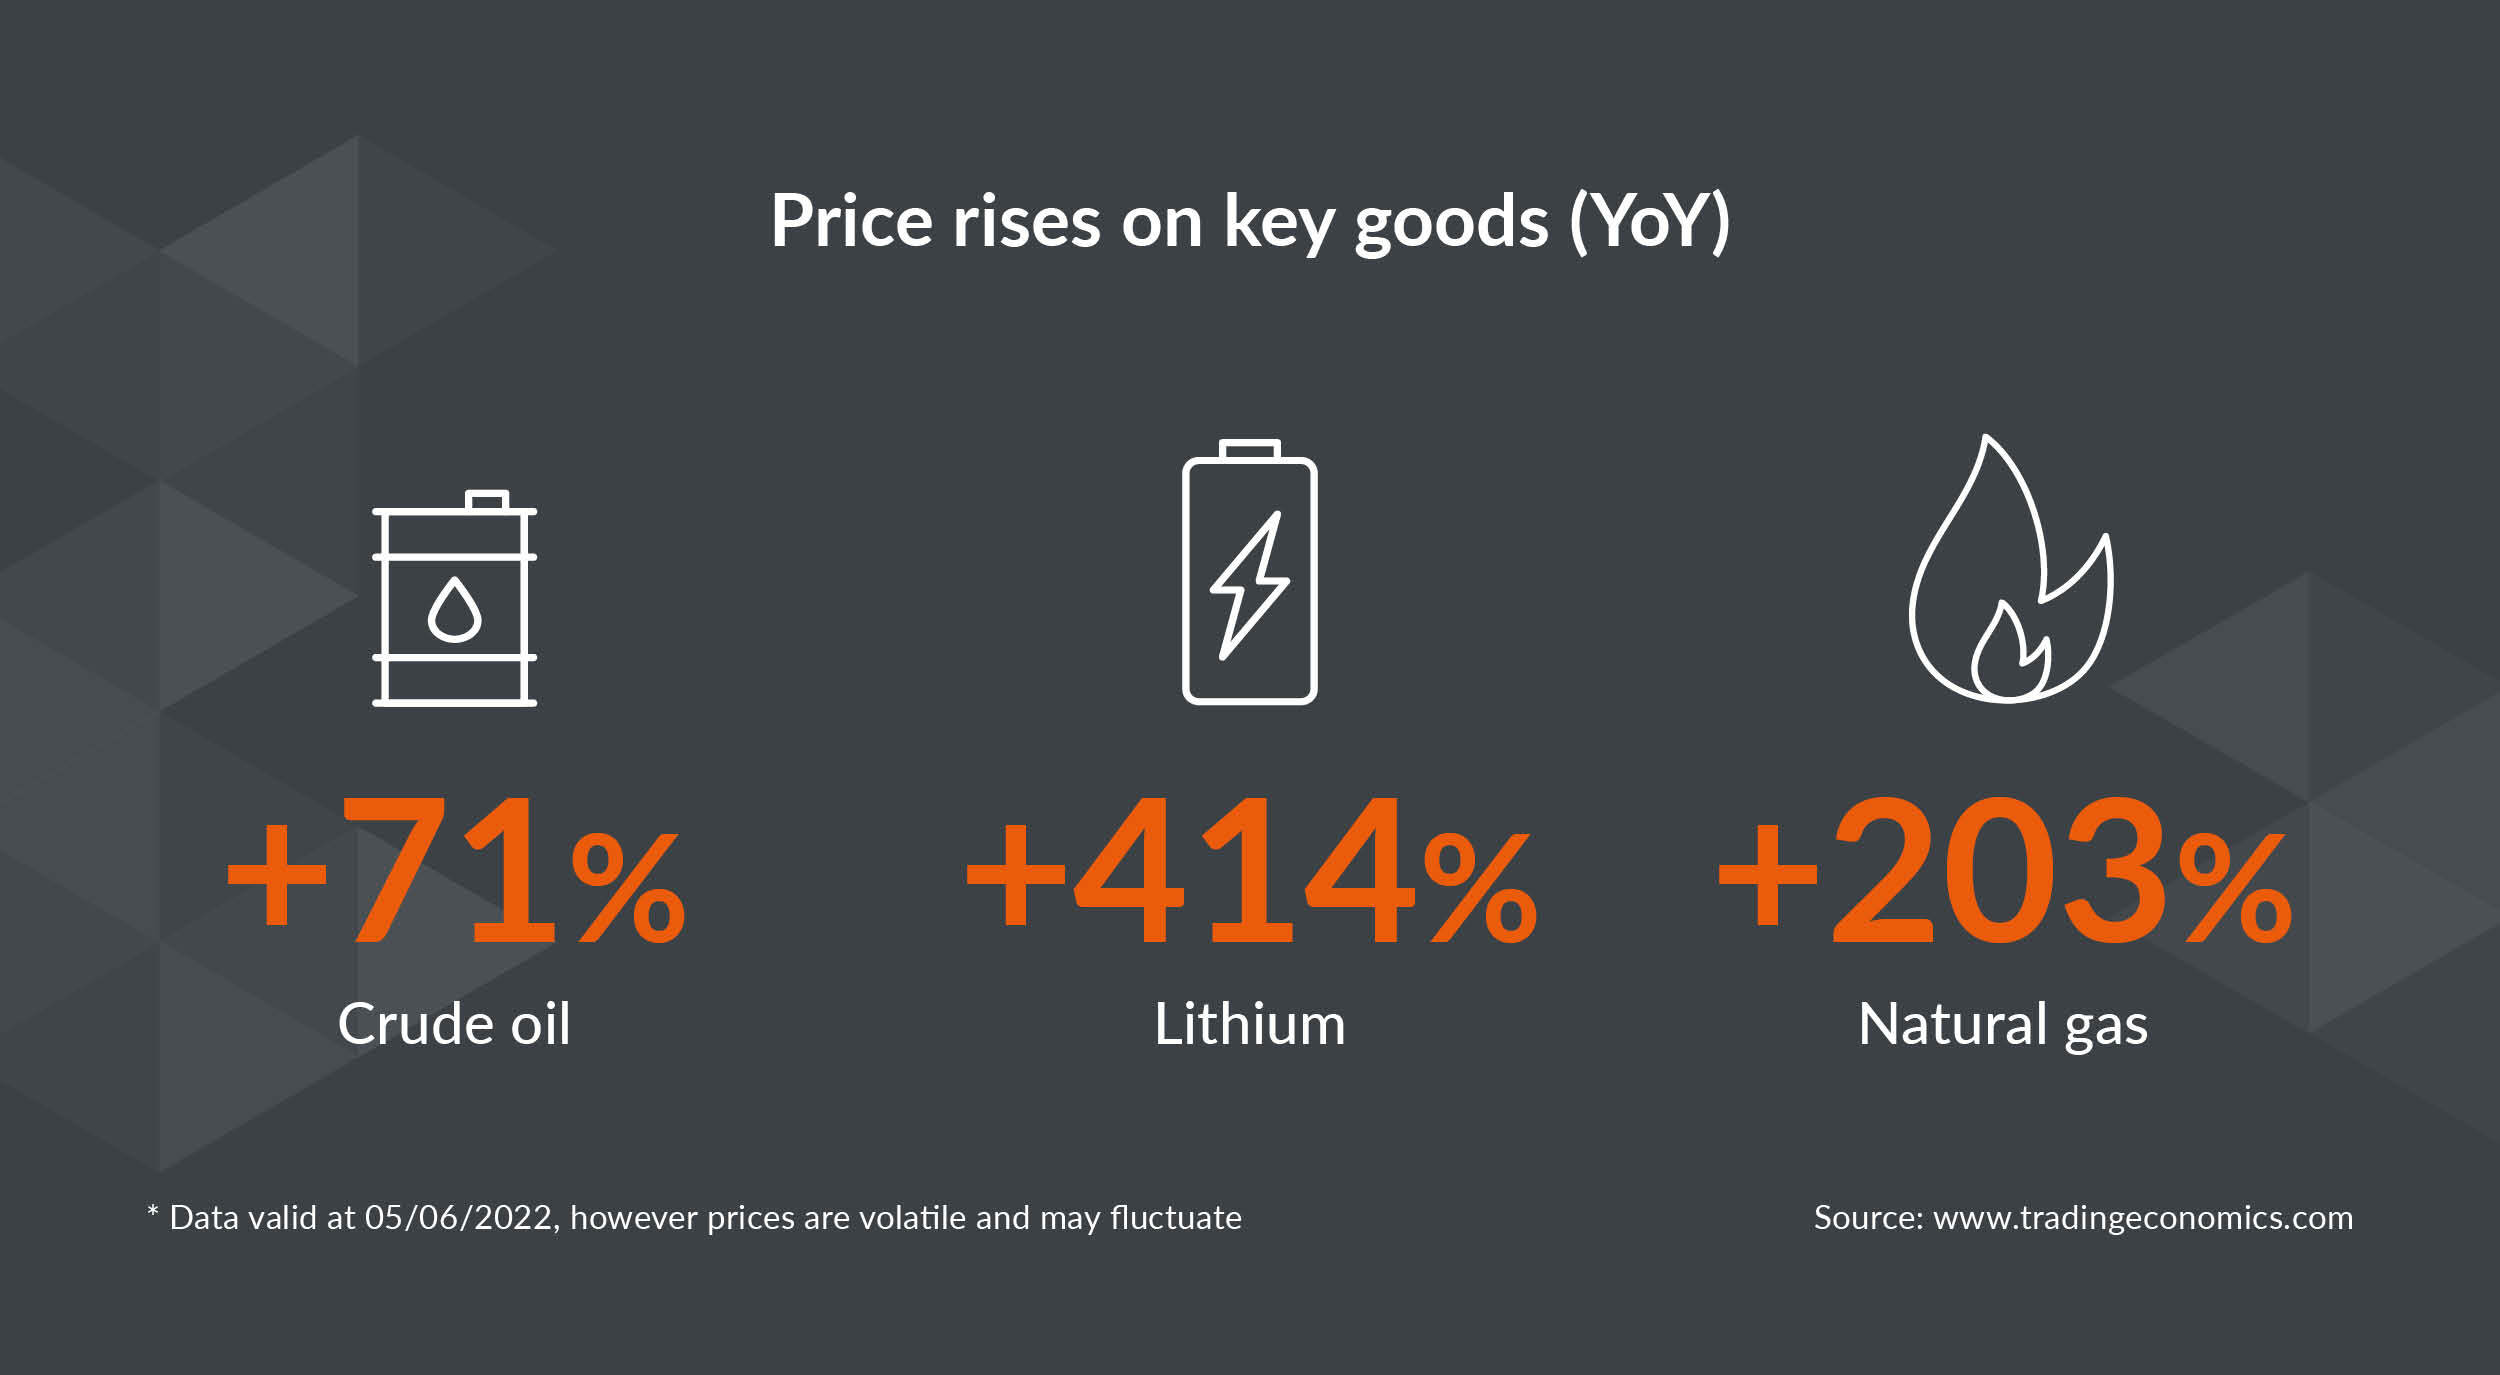 Infographic showing price rises on key goods